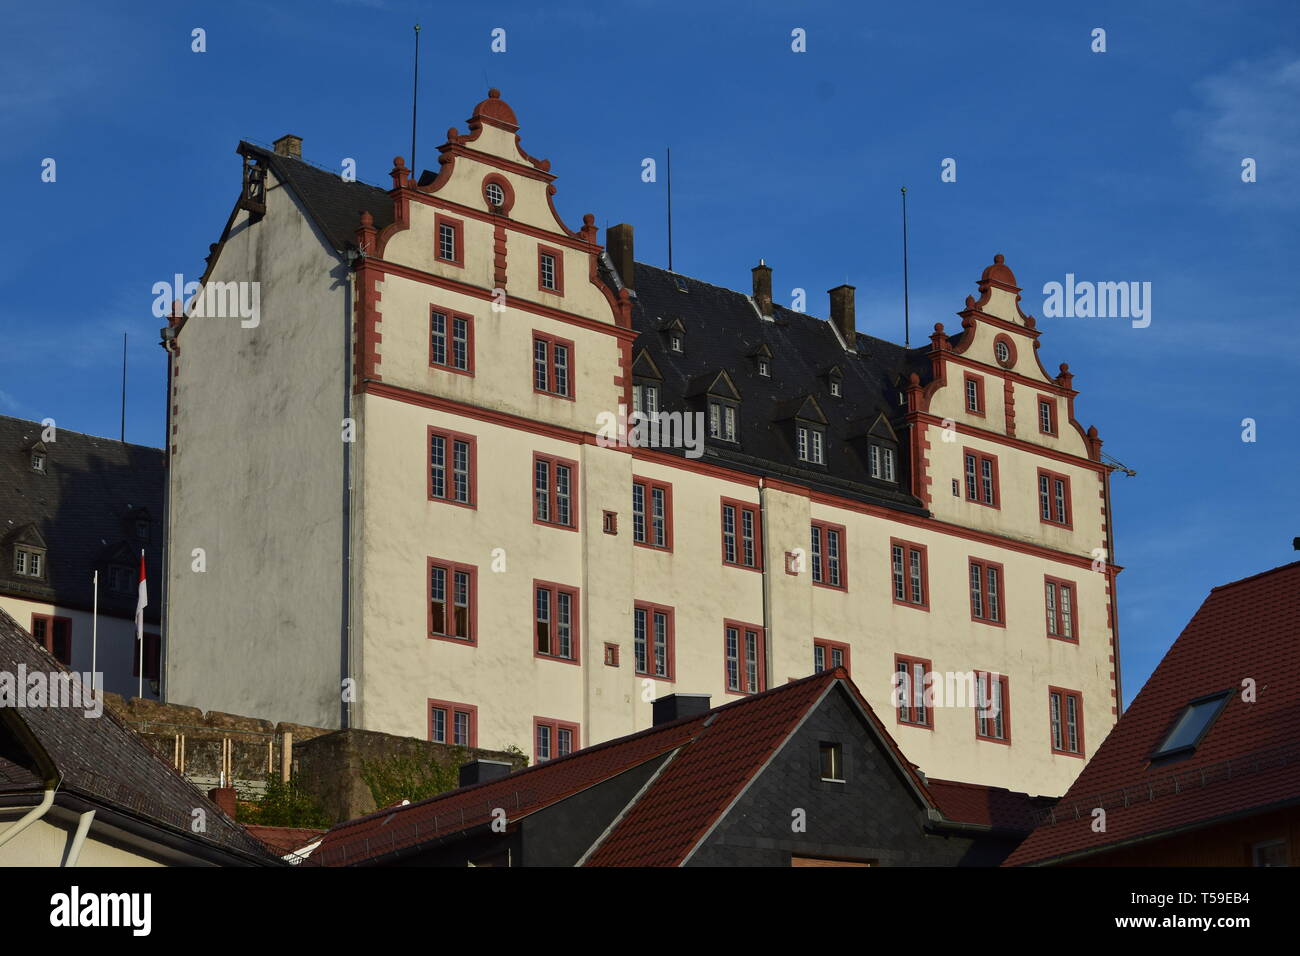 Lichtenberg Castle in the evening light. View from downtown. Fischbachtal, Odenwald, Germany. Stock Photo